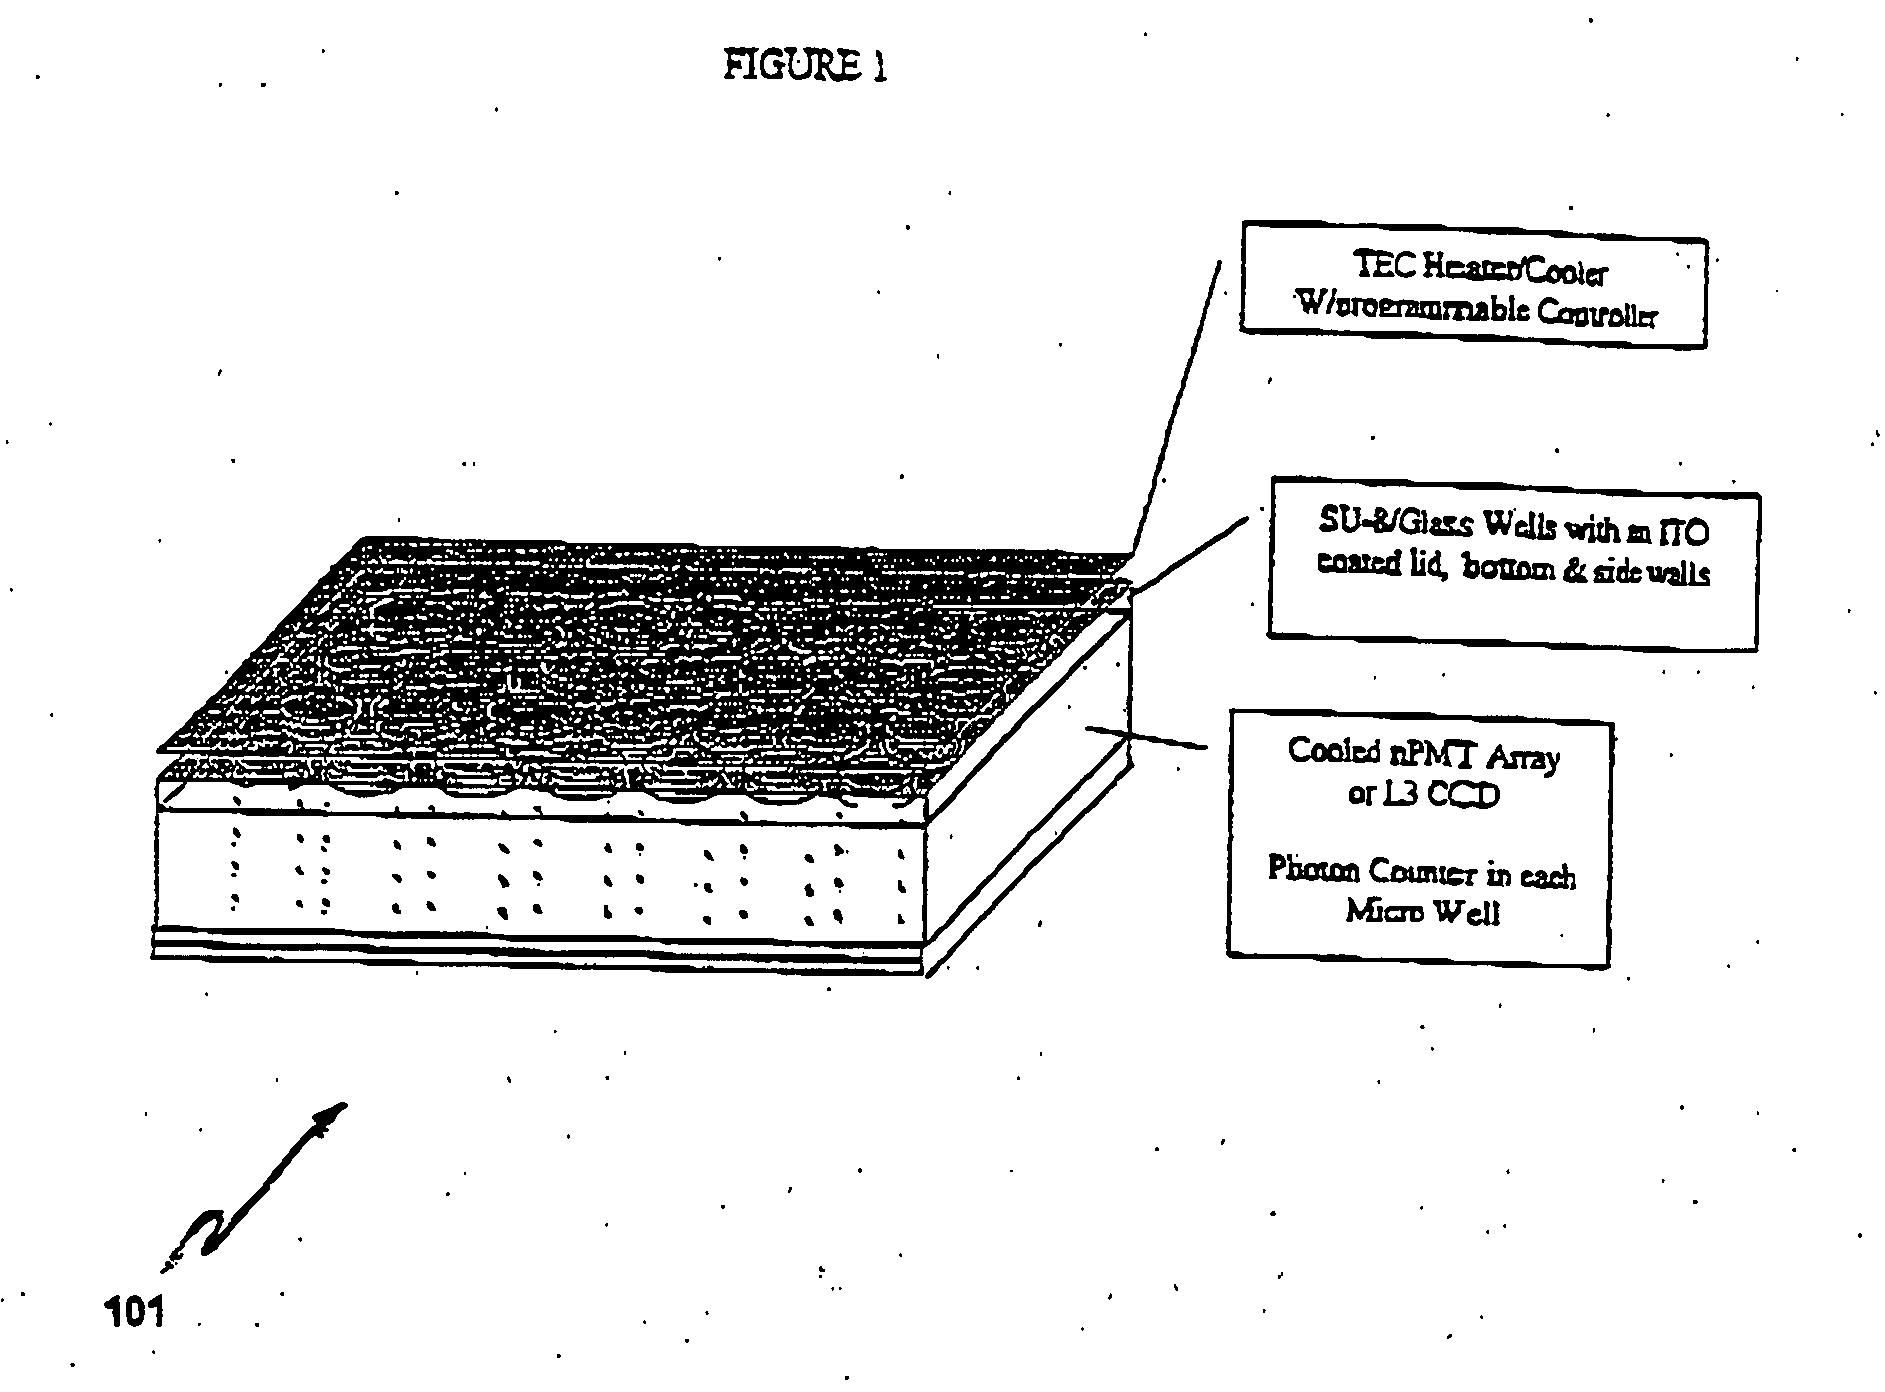 Apparatus and method for multiplex analysis